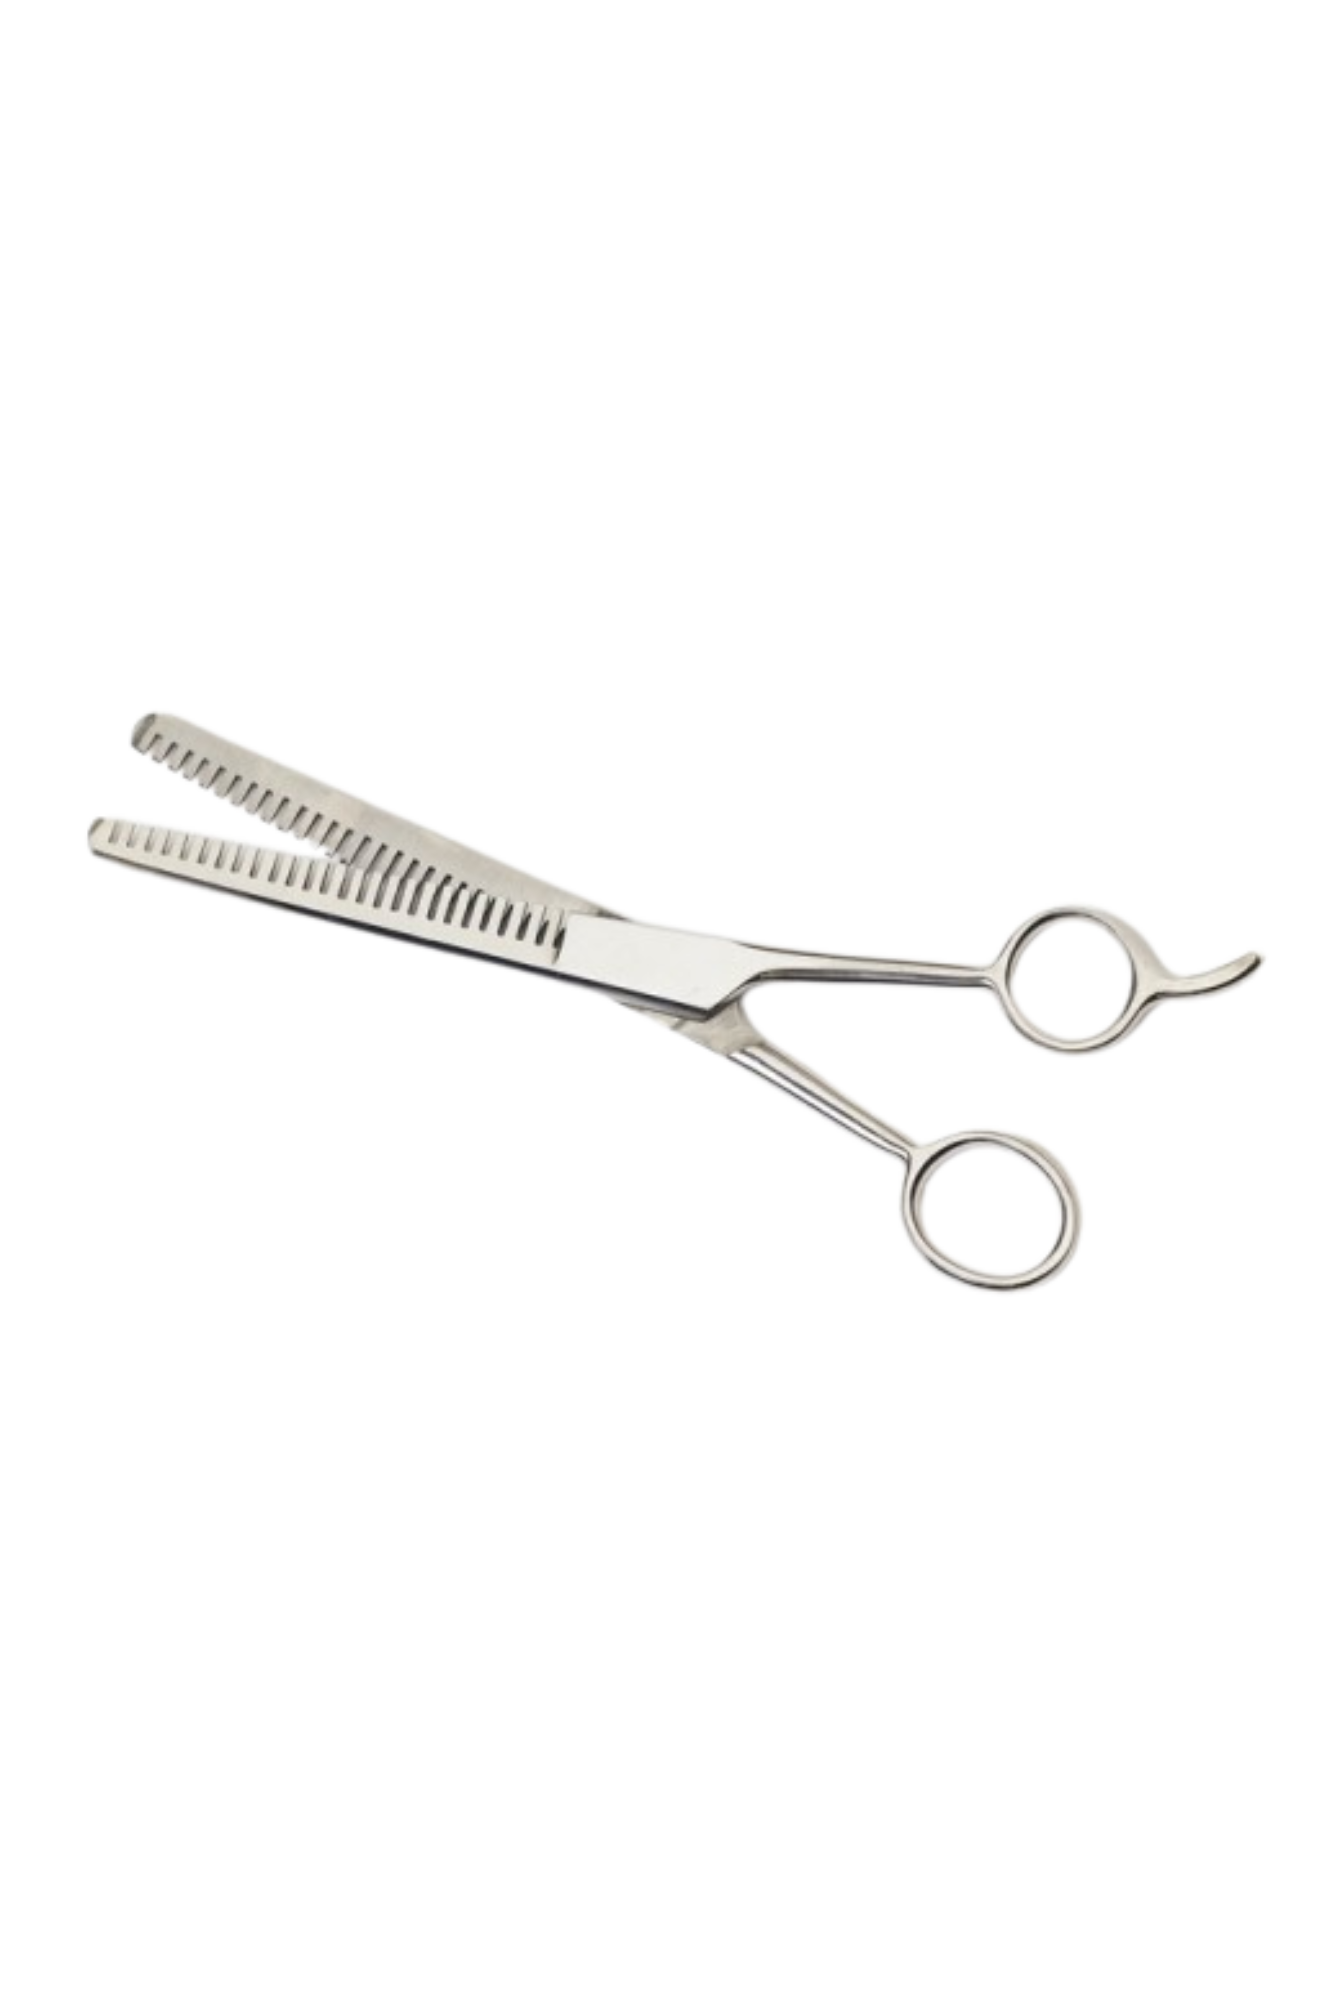 EQUIESSENTIAL THINNING SHEAR